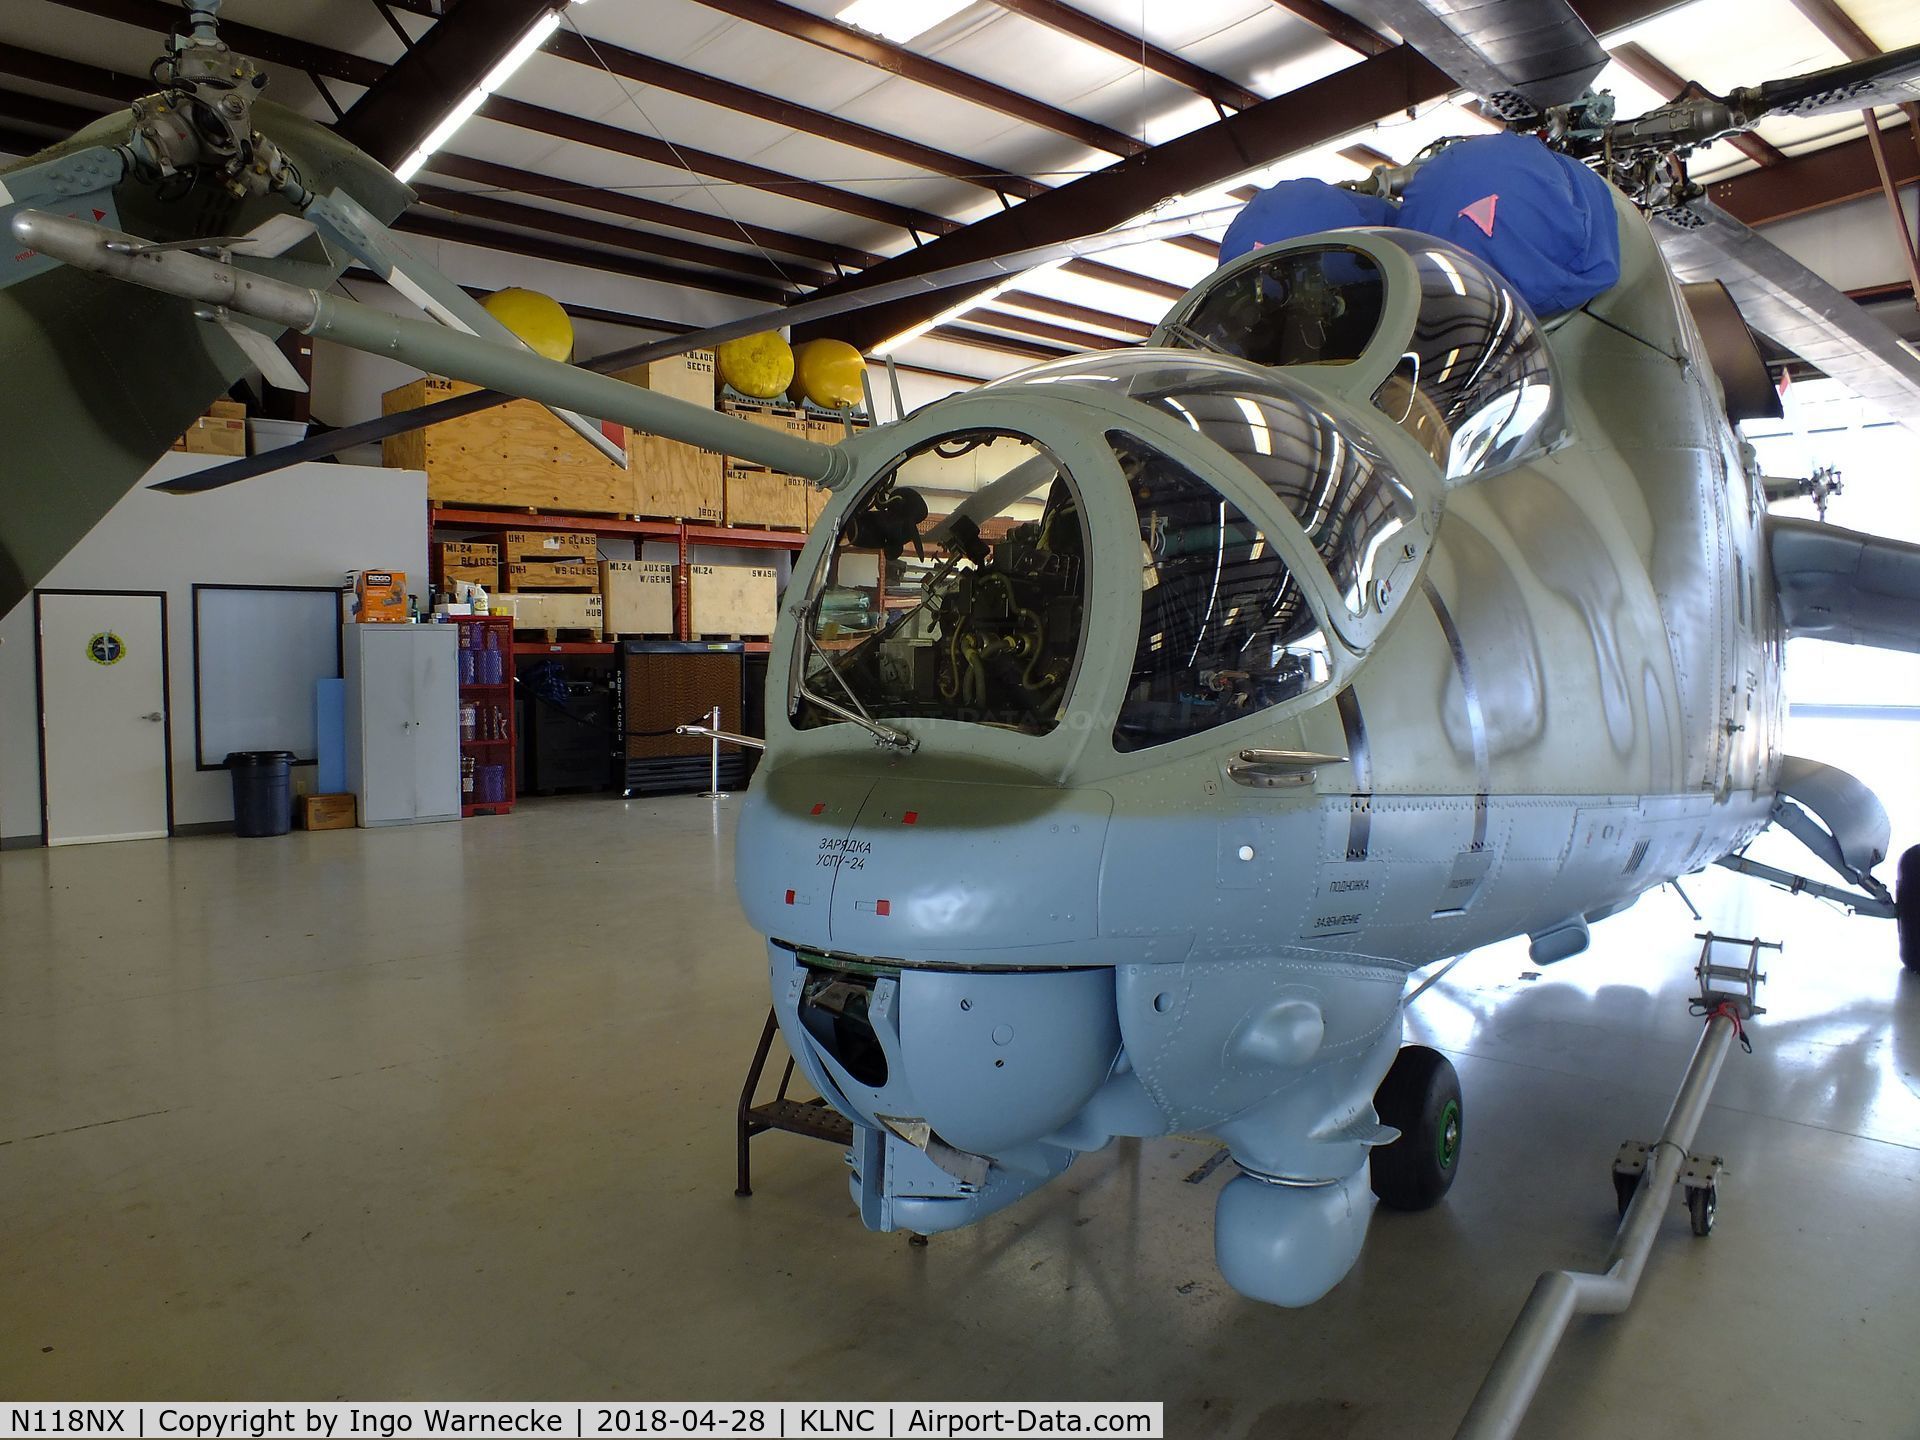 N118NX, Mil MI-24D C/N 150153, Mil Mi-24D HIND-D in a hangar of the former Cold War Air Museum at Lancaster Regional Airport, Dallas County TX